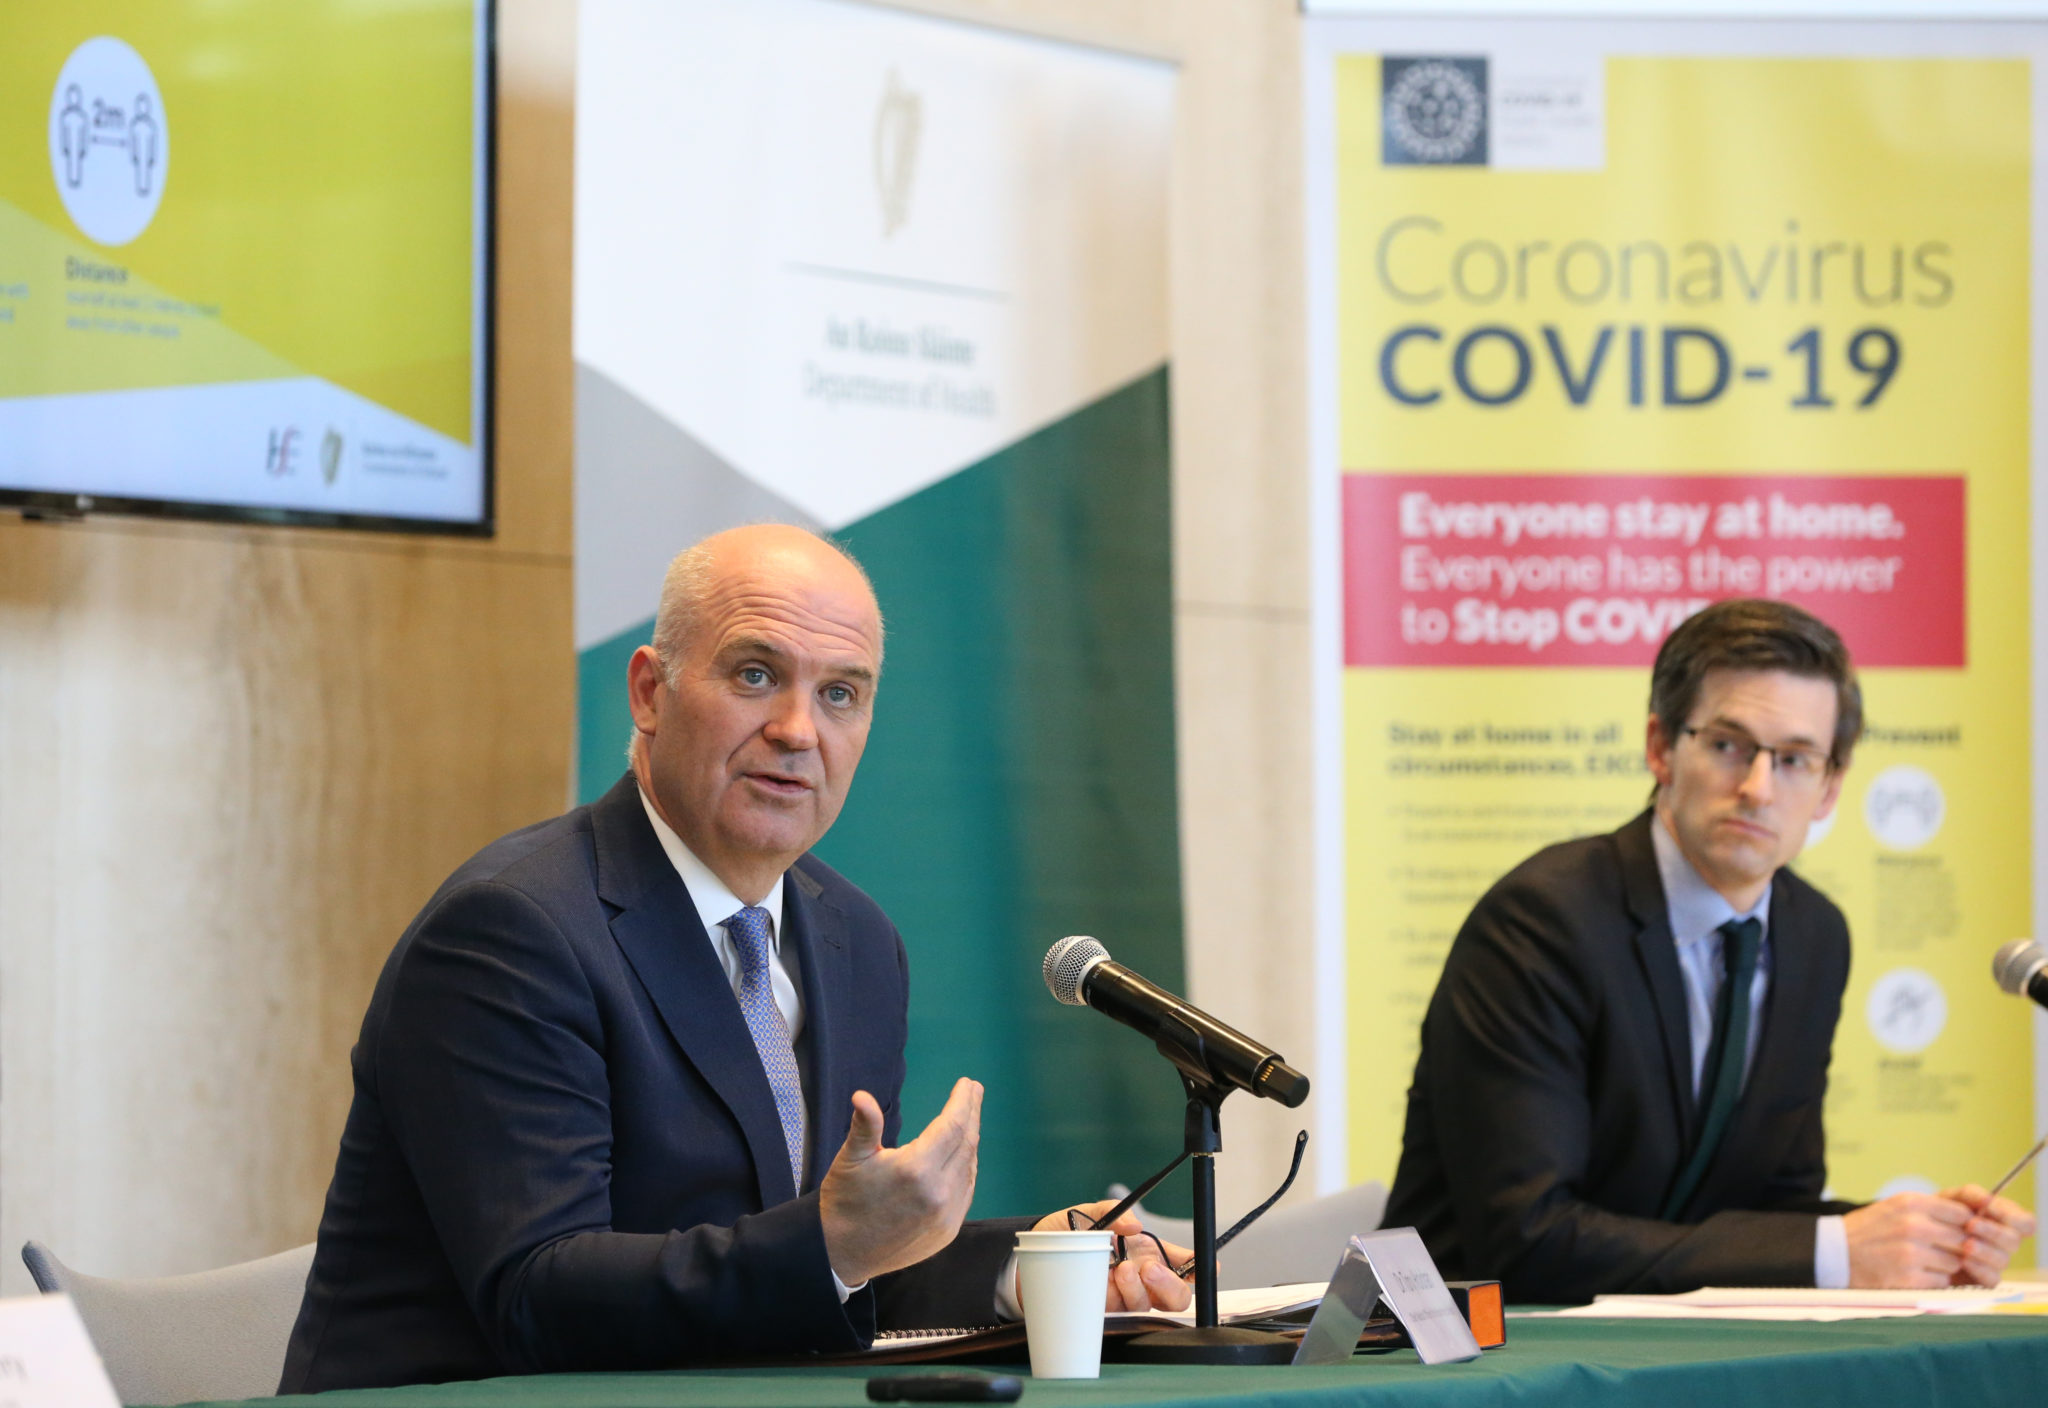 Chief Medical Officer Dr Tony Holohan and Deputy Chief Medical Officer, Dr Ronan Glynn, are seen at a Department of Health briefing in April 2020.